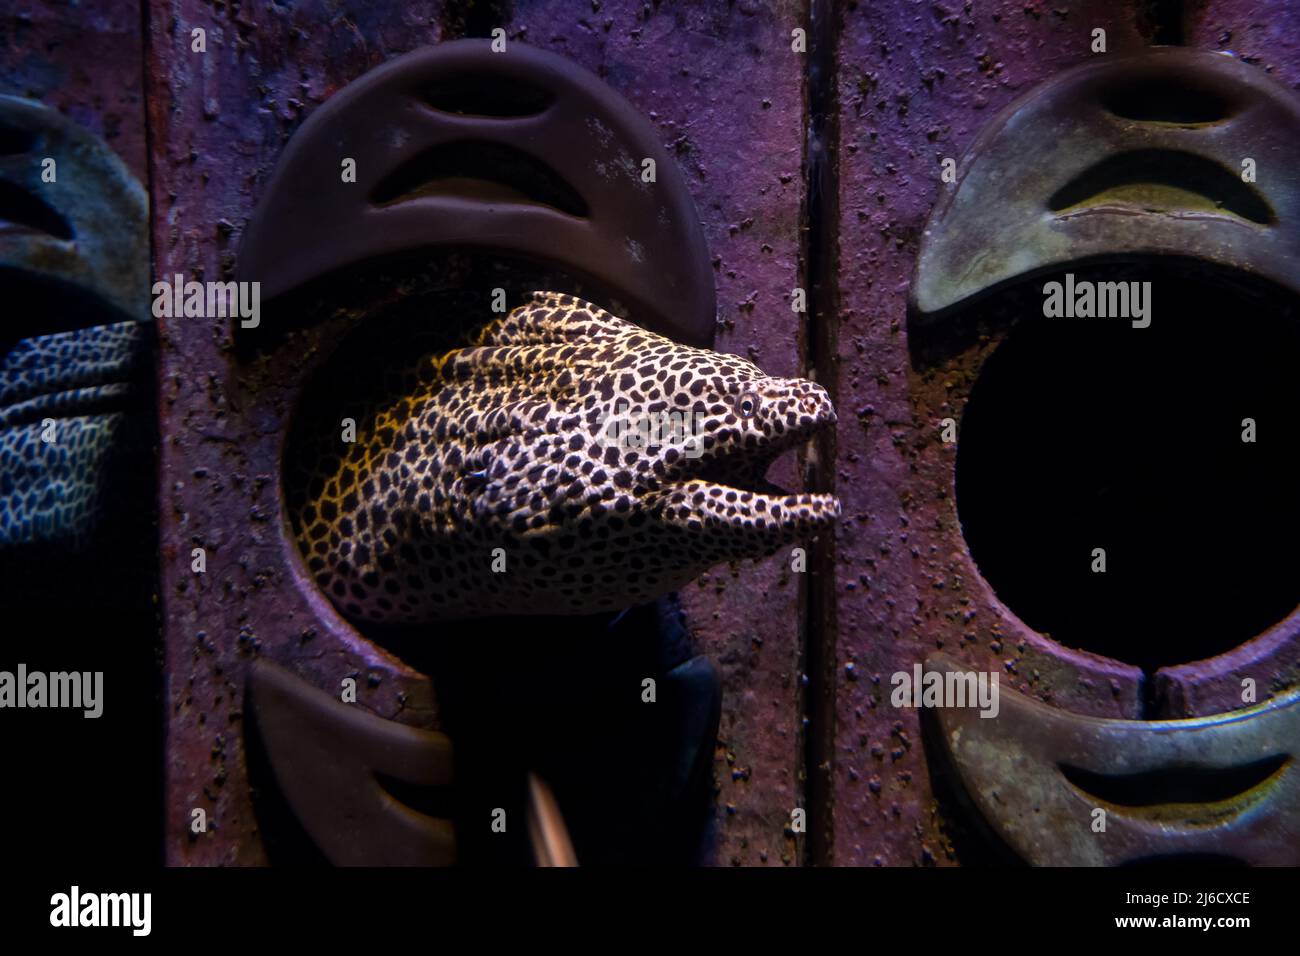 Honeycomb Moray Eel (Gymnothorax favagineus) looking out of its nest in an aquarium Stock Photo